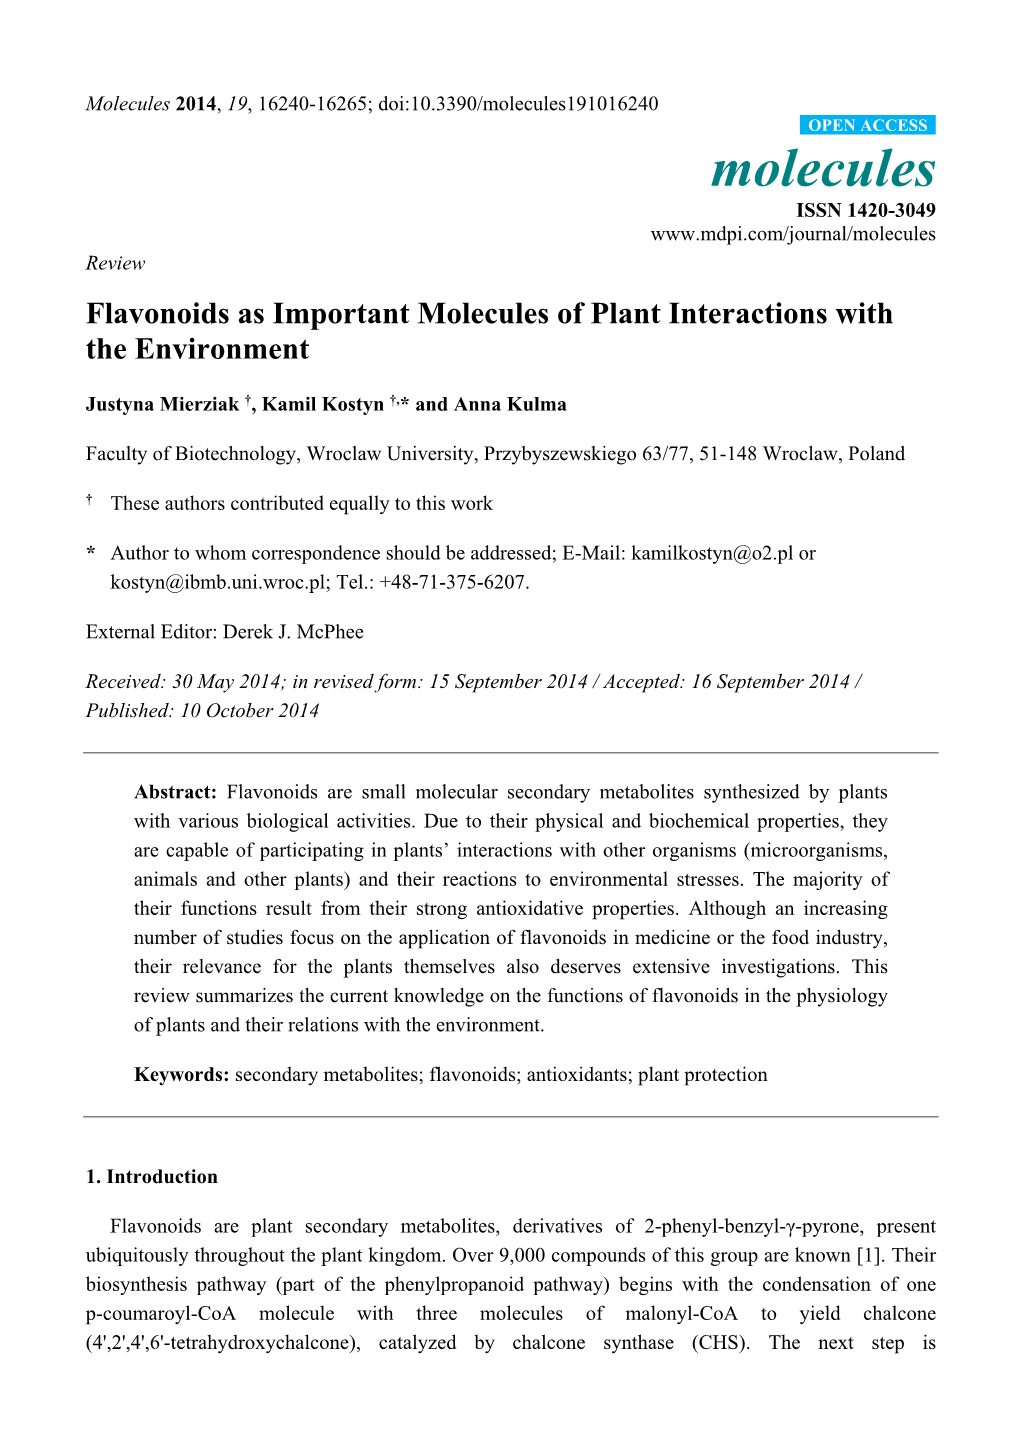 Flavonoids As Important Molecules of Plant Interactions with the Environment